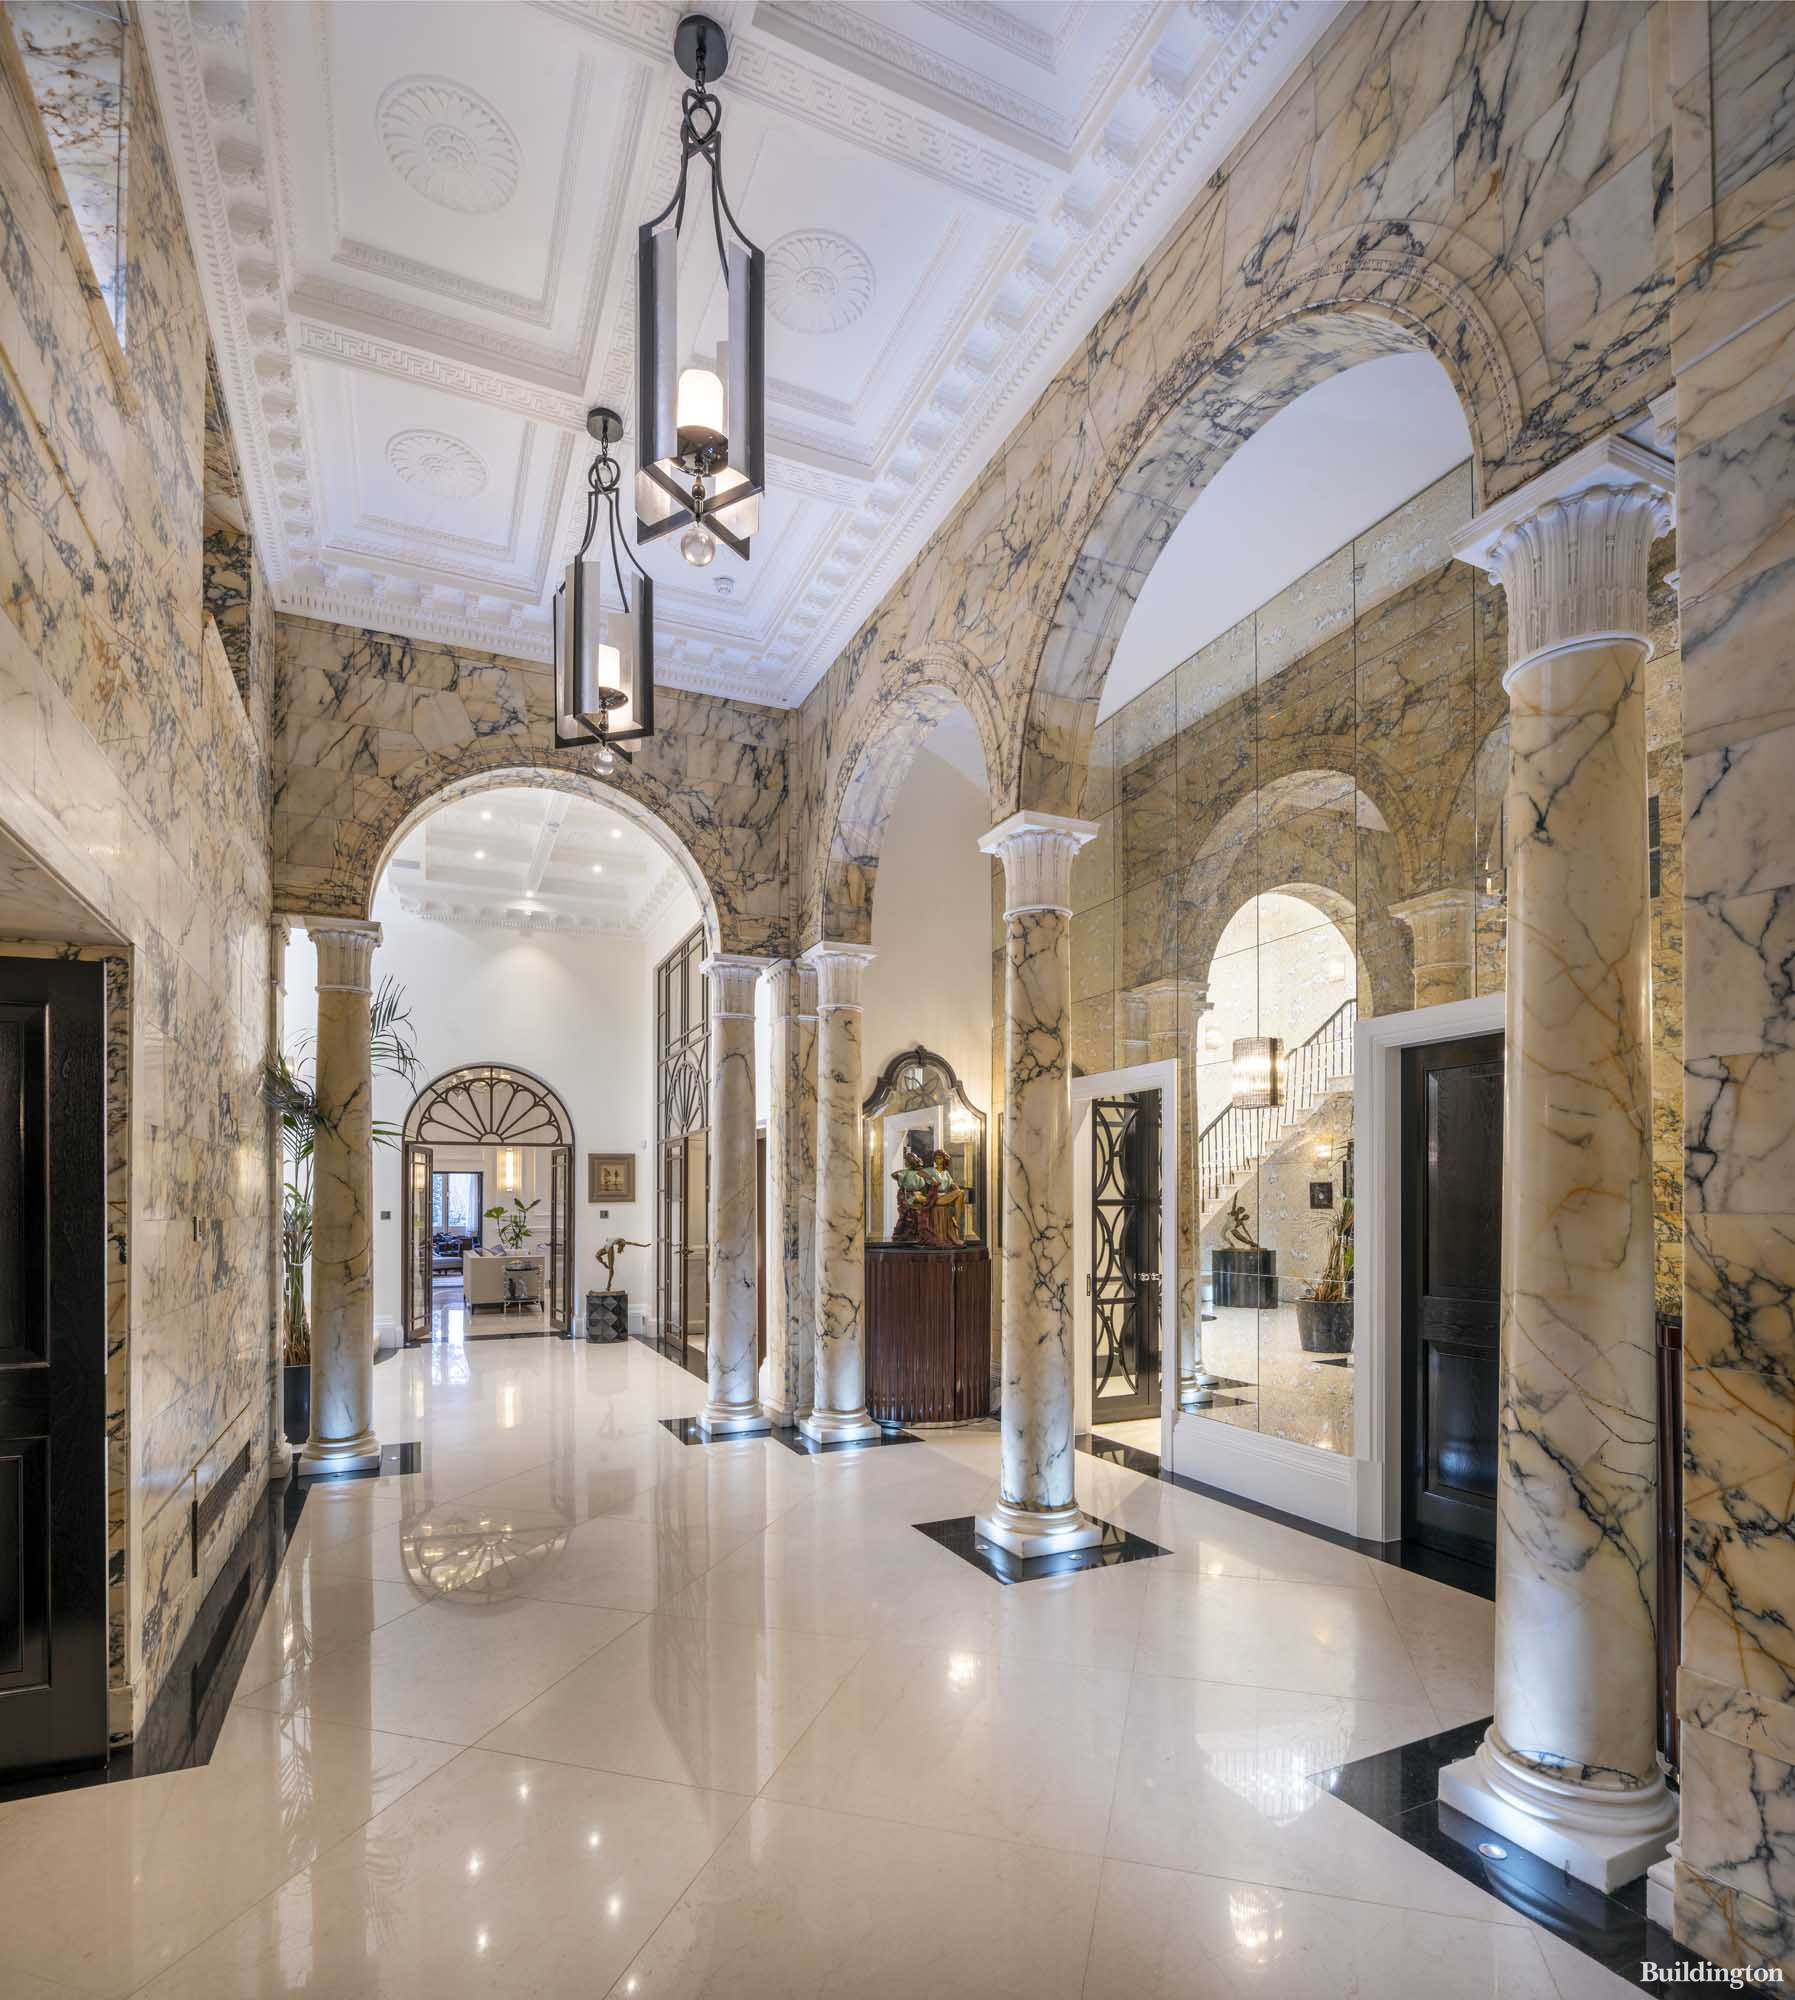 Marble entrance lobby at Inverforth House in Hampstead, London NW3.